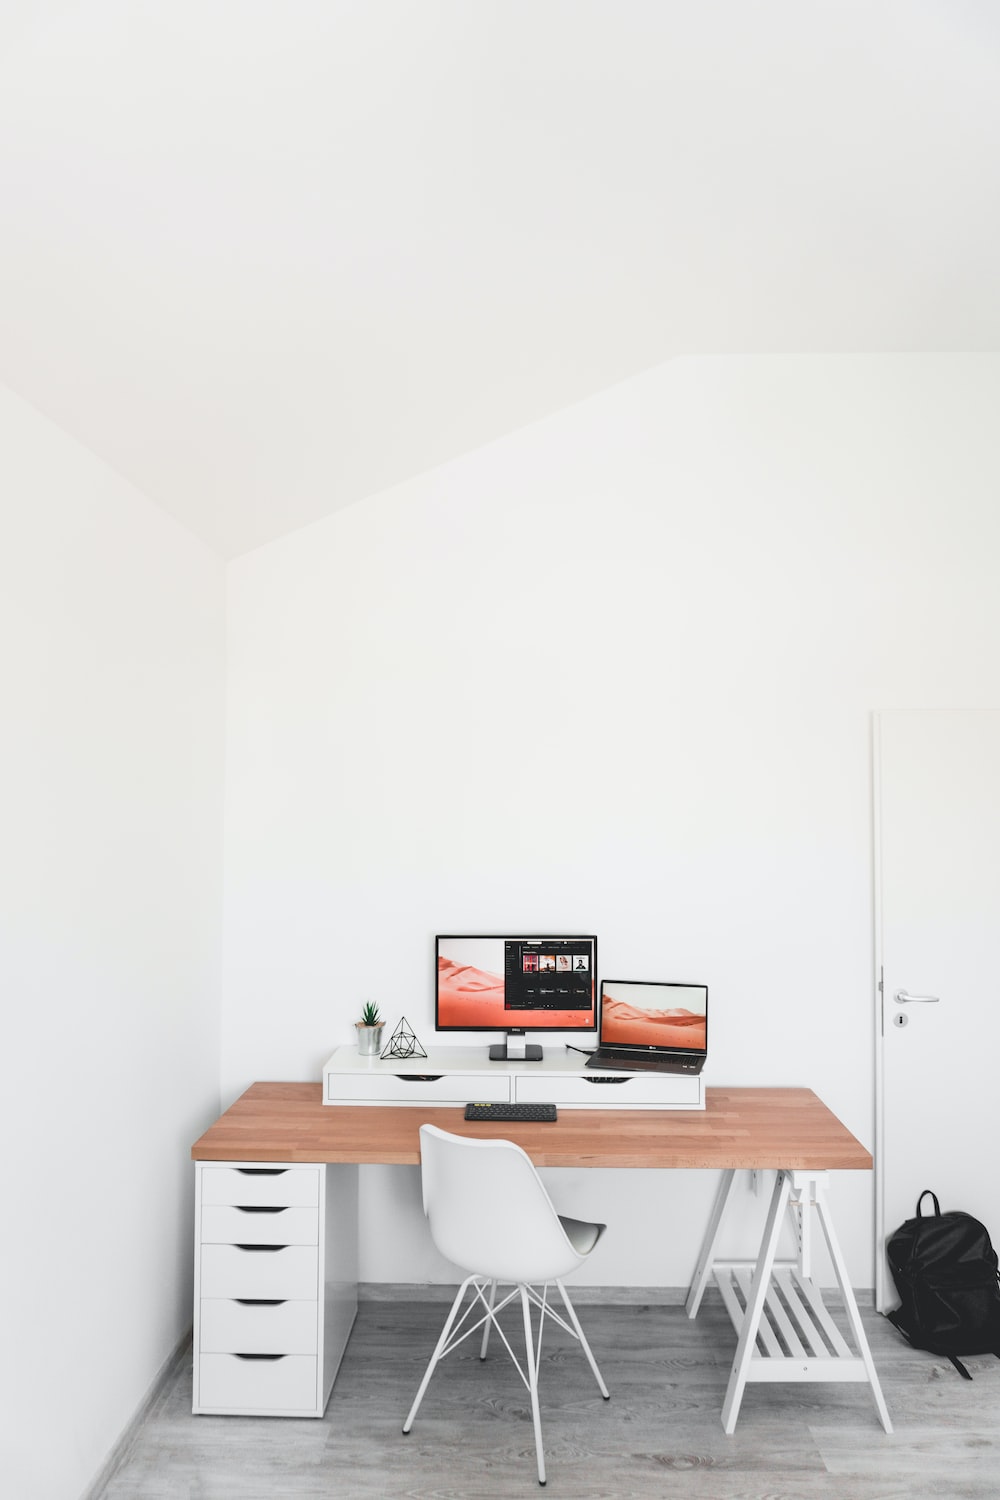 What is the importance of a desk?